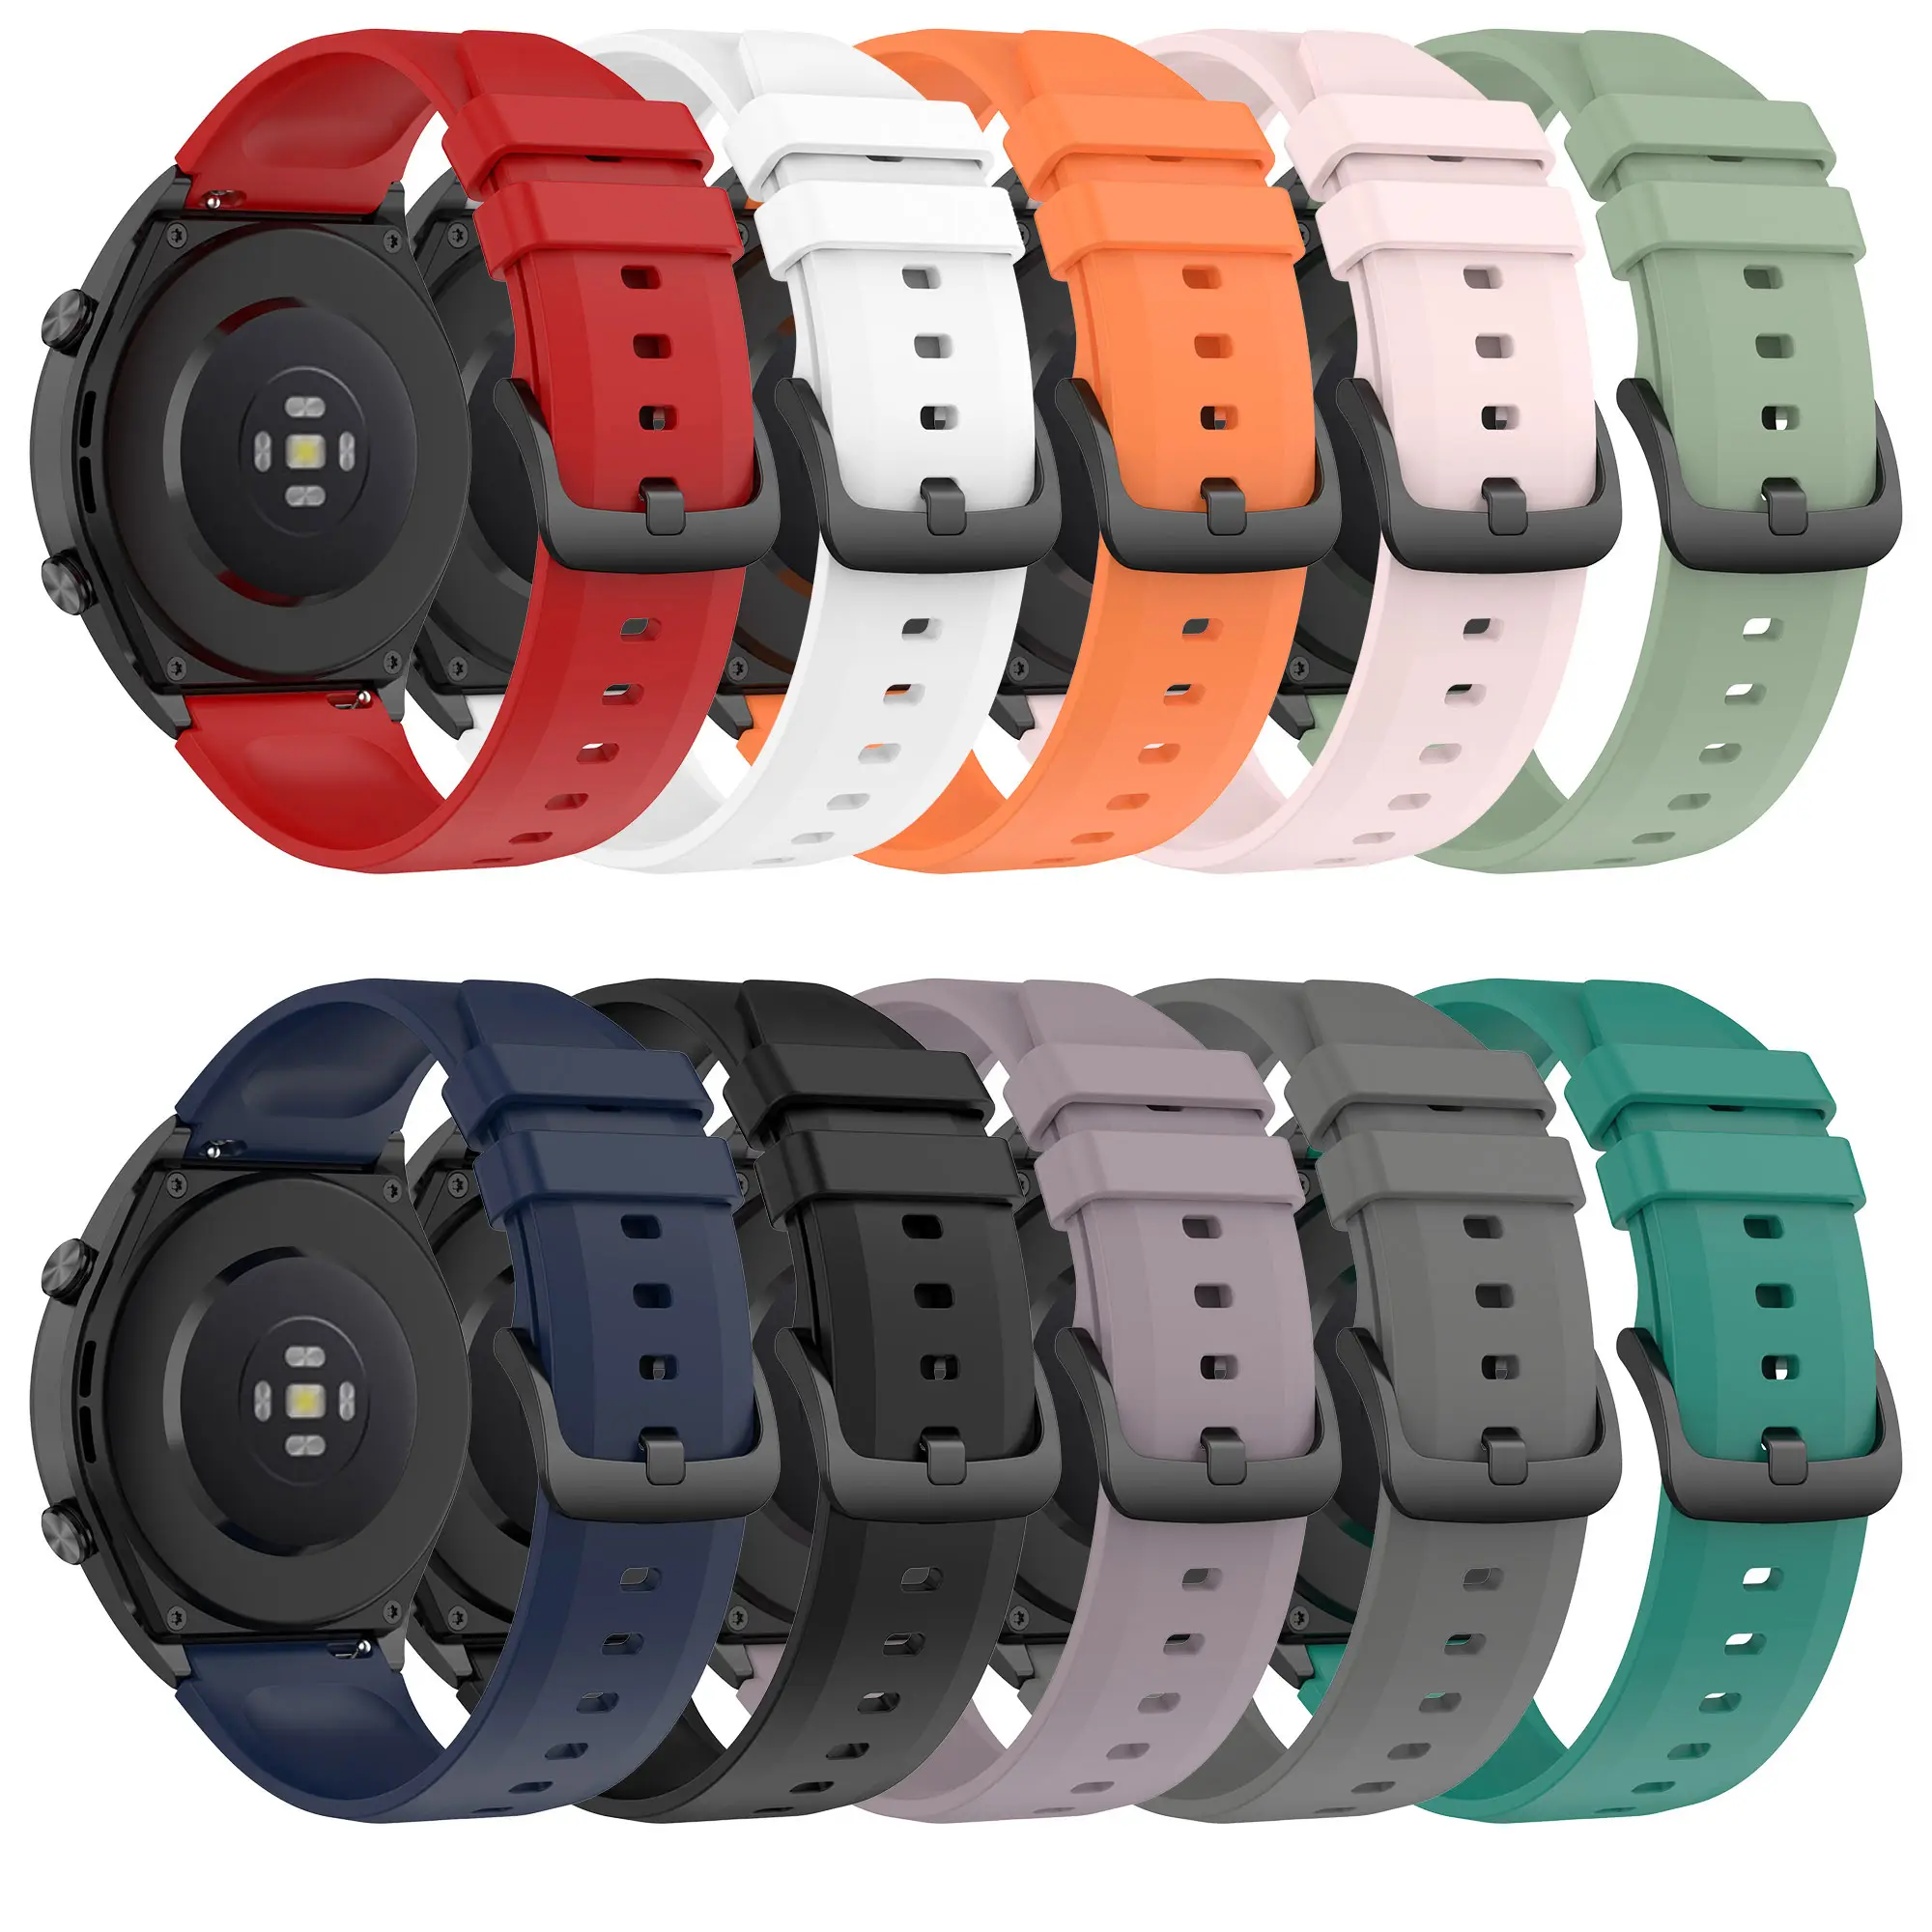 Factory amazfit GTR 2 3 watch color S1 active Sport Silicone smart Band Straps rubber 22mm For xiaomi women